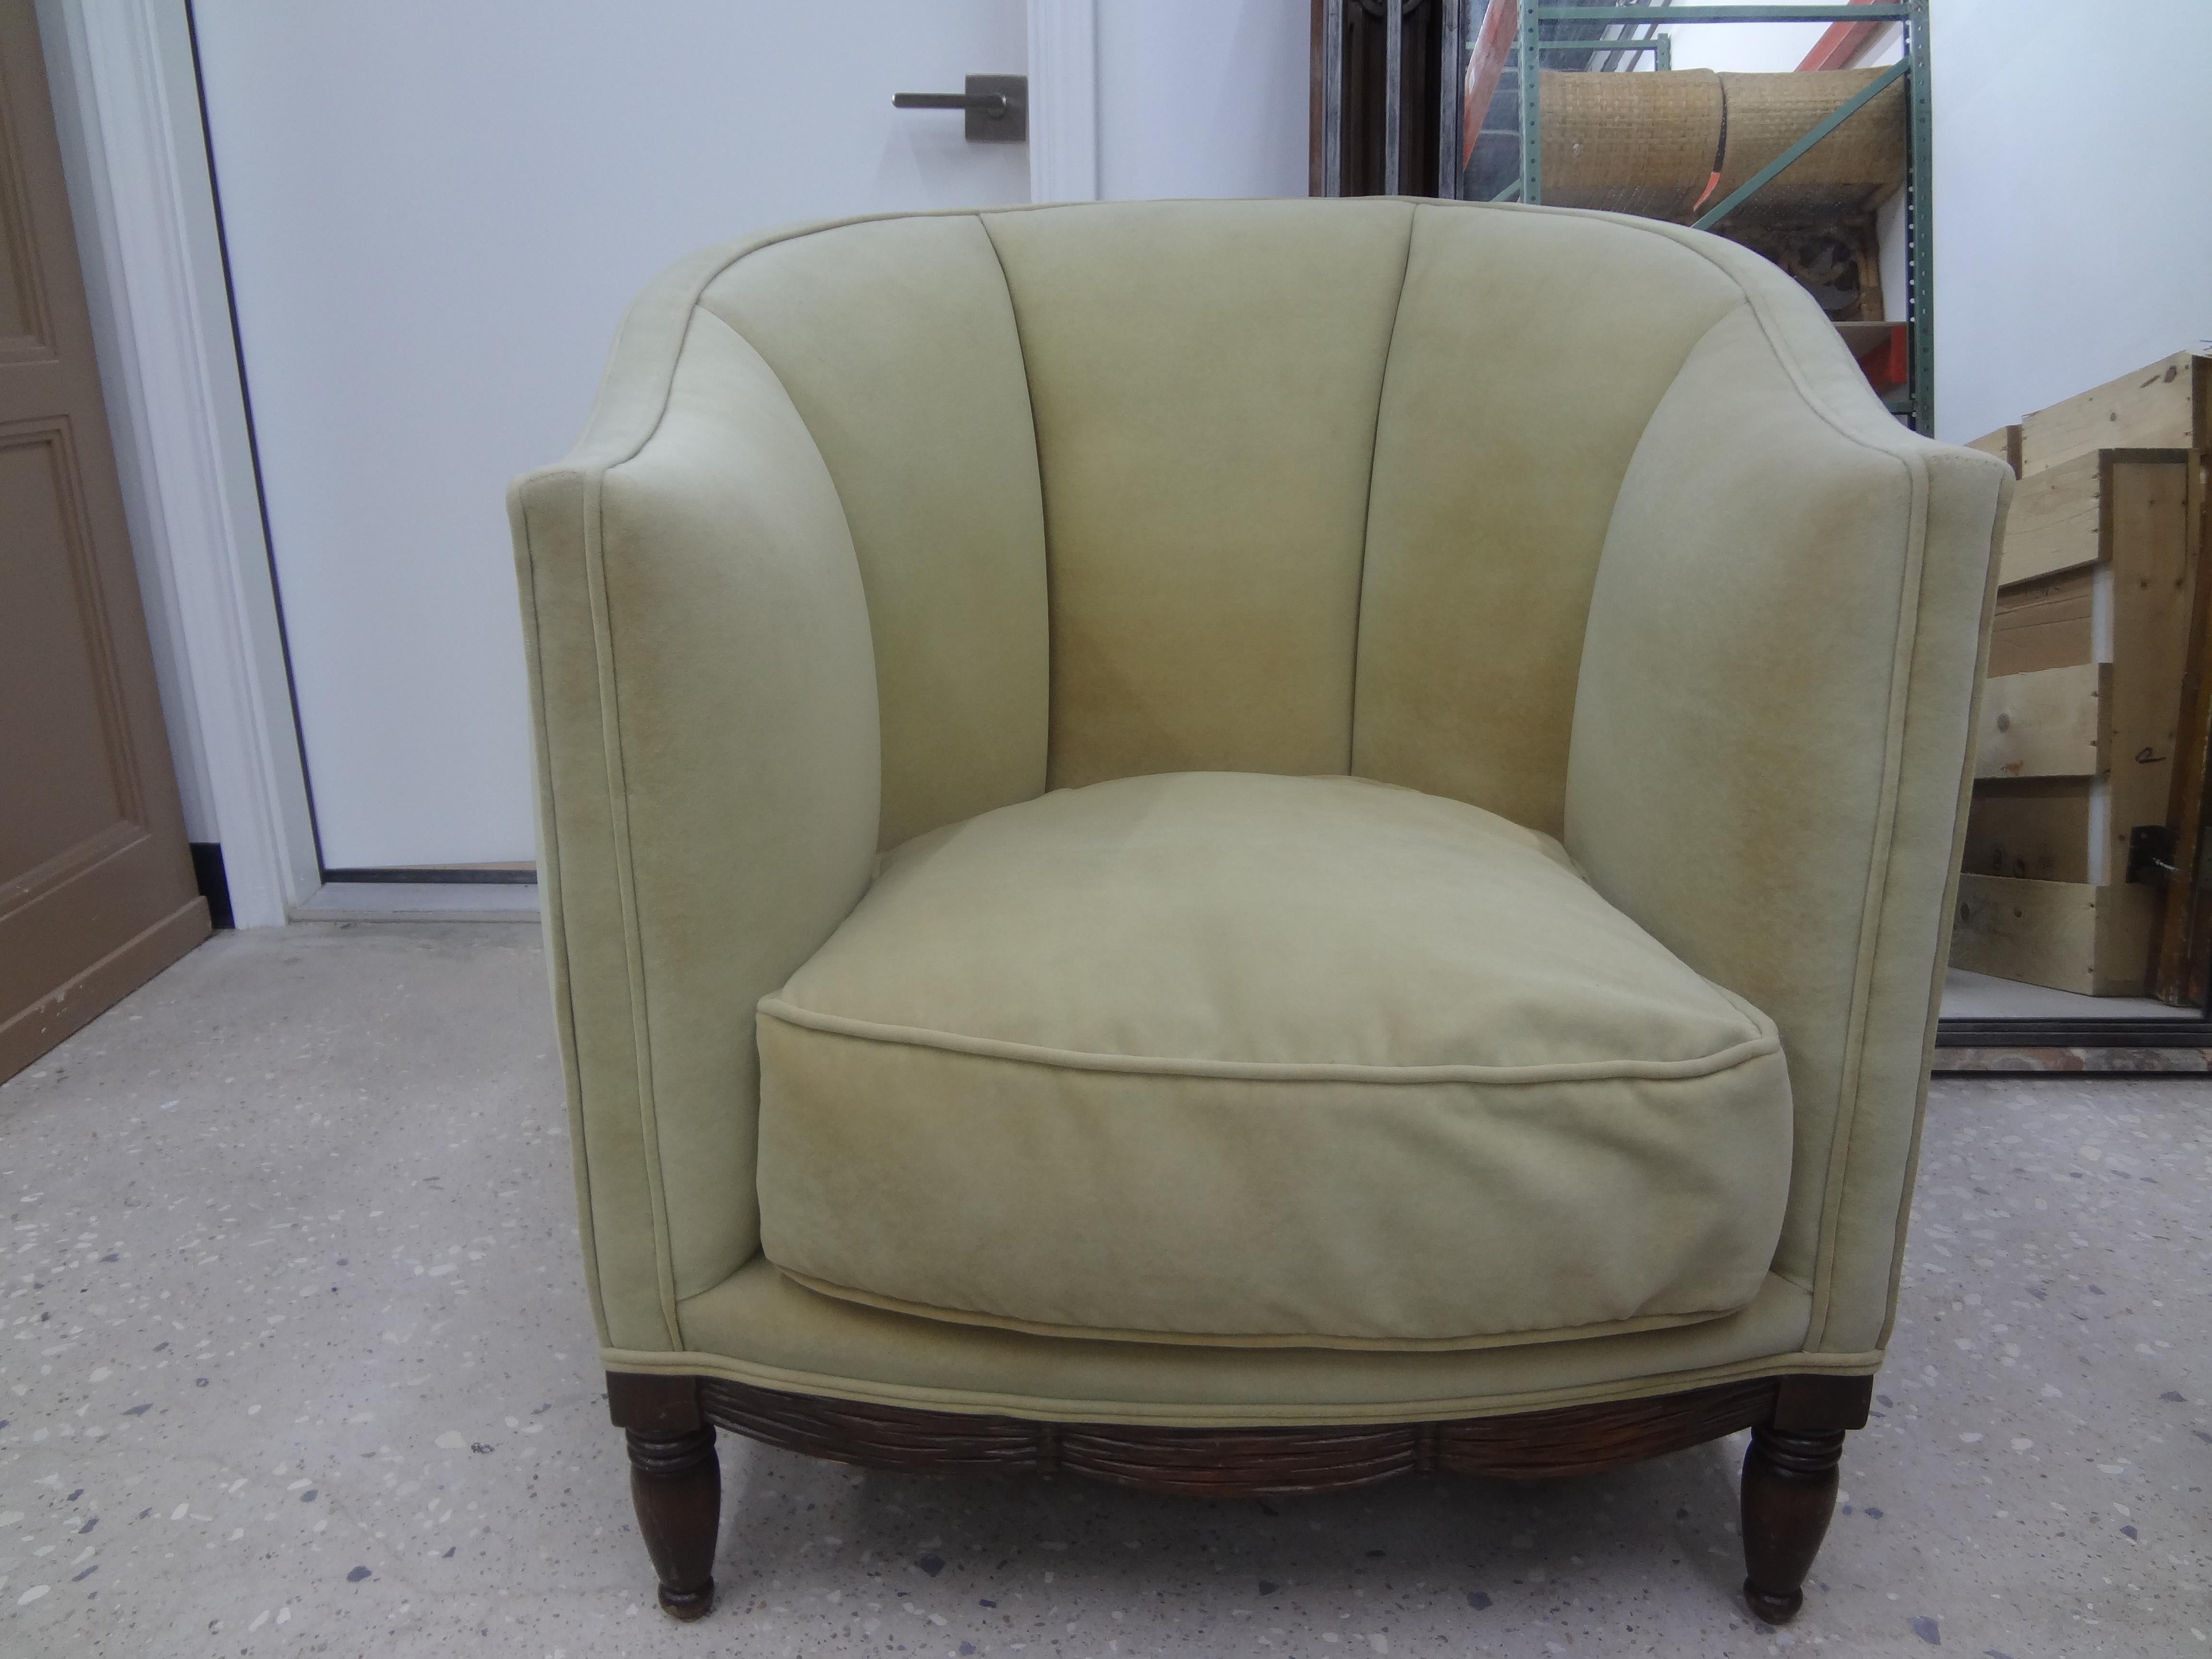 French Louis XVI style channel back bergere. This stunning and comfortable French walnut barrel back chair, club chair, side chair or tub chair has a lovely scrolled swag design around the entire chair and is upholstered in velvet with a down